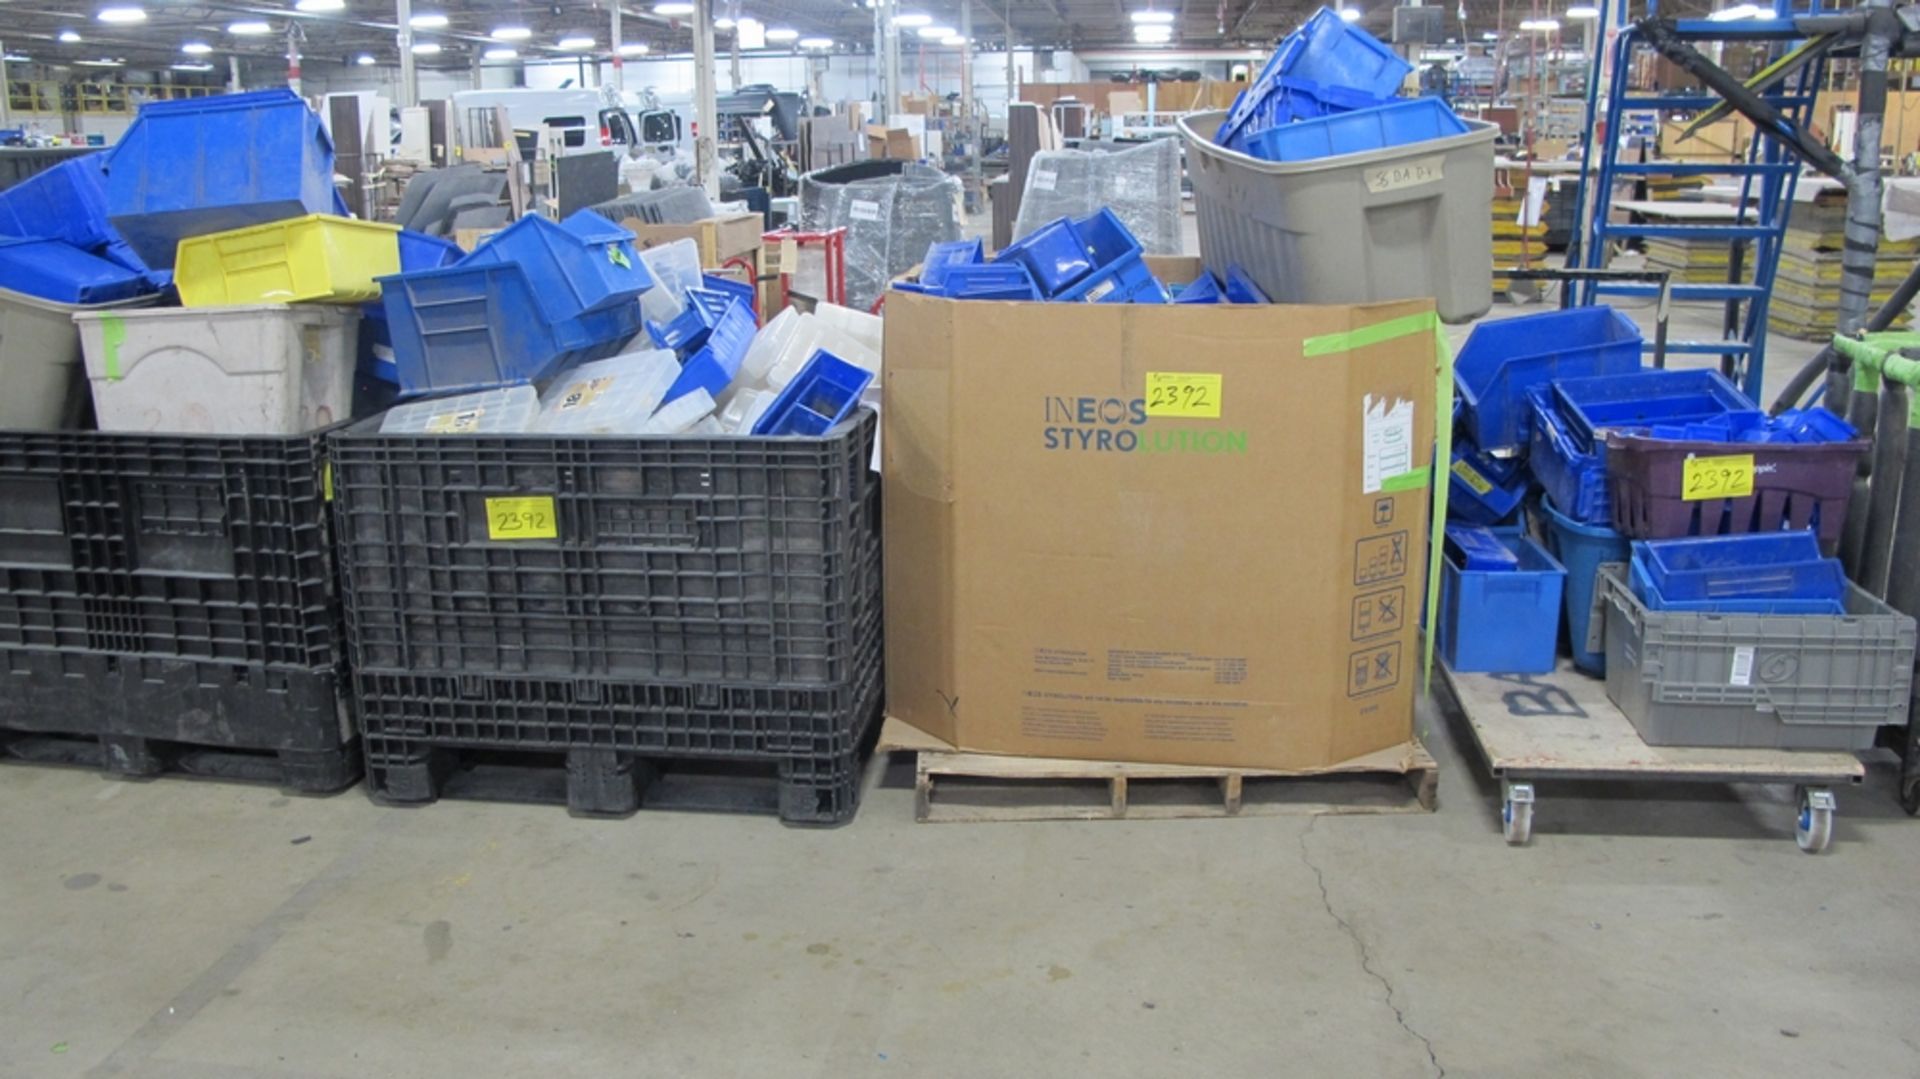 LOT OF 2 PLASTIC TOTES, 1 GAYLORD AND 1 CART OF BLUE BINS, ETC (100 SHIRLEY AVE KITCHENER)